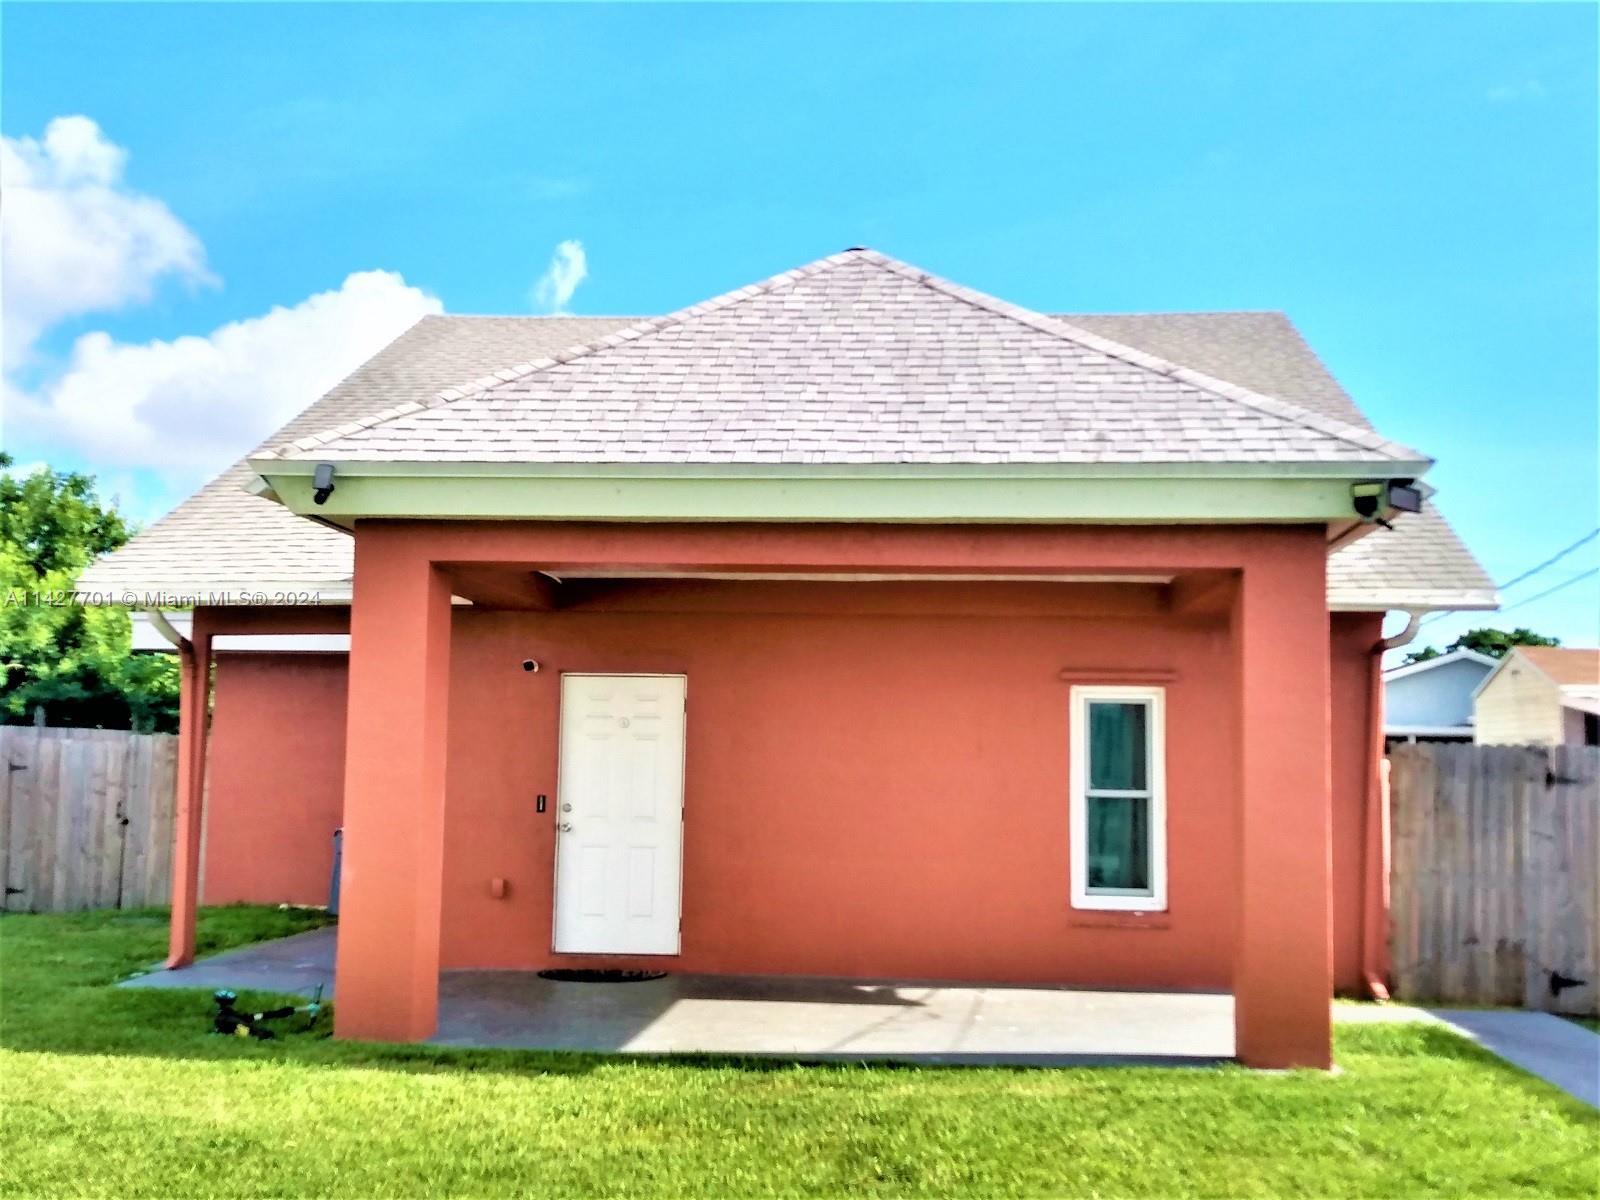 2-story home built in 2015. This single-family home offers a comfortable living space with 3 large b